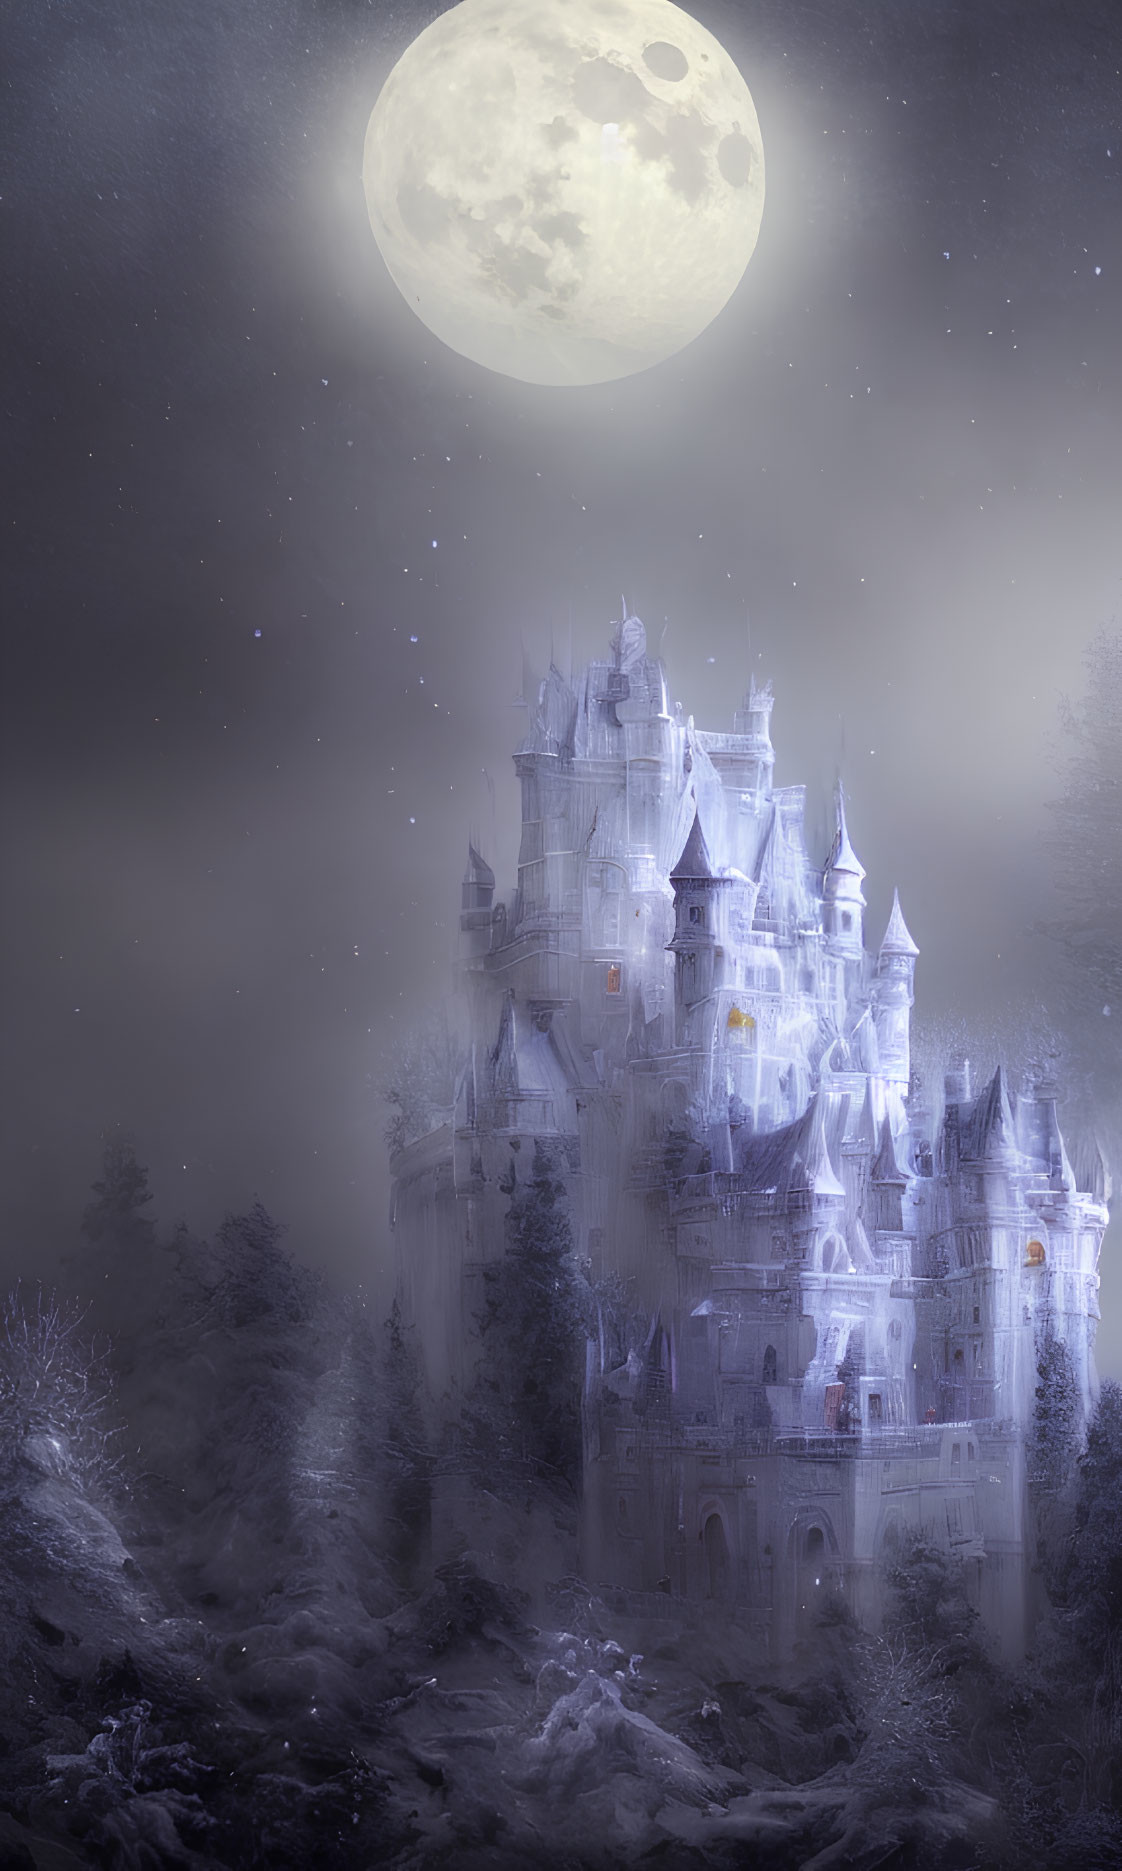 Ethereal castle under full moon in misty forest landscape